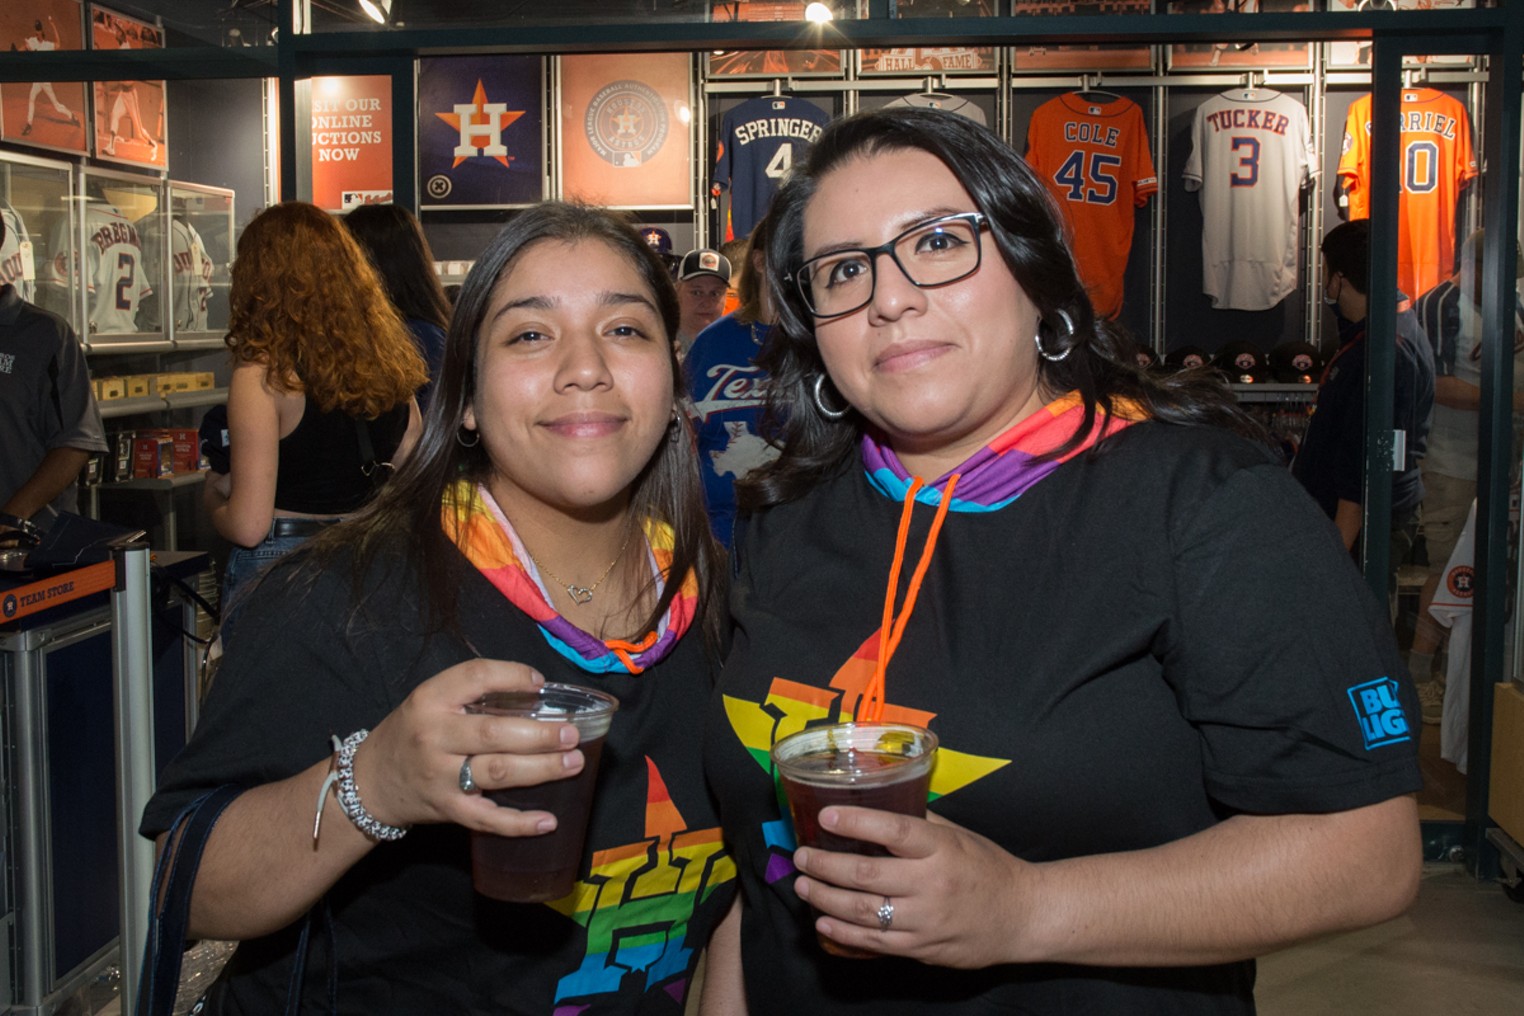 Houston Astros on X: Happy Pride Month! 🏳️‍🌈 Join us for Pride Night on  June 21st:   / X